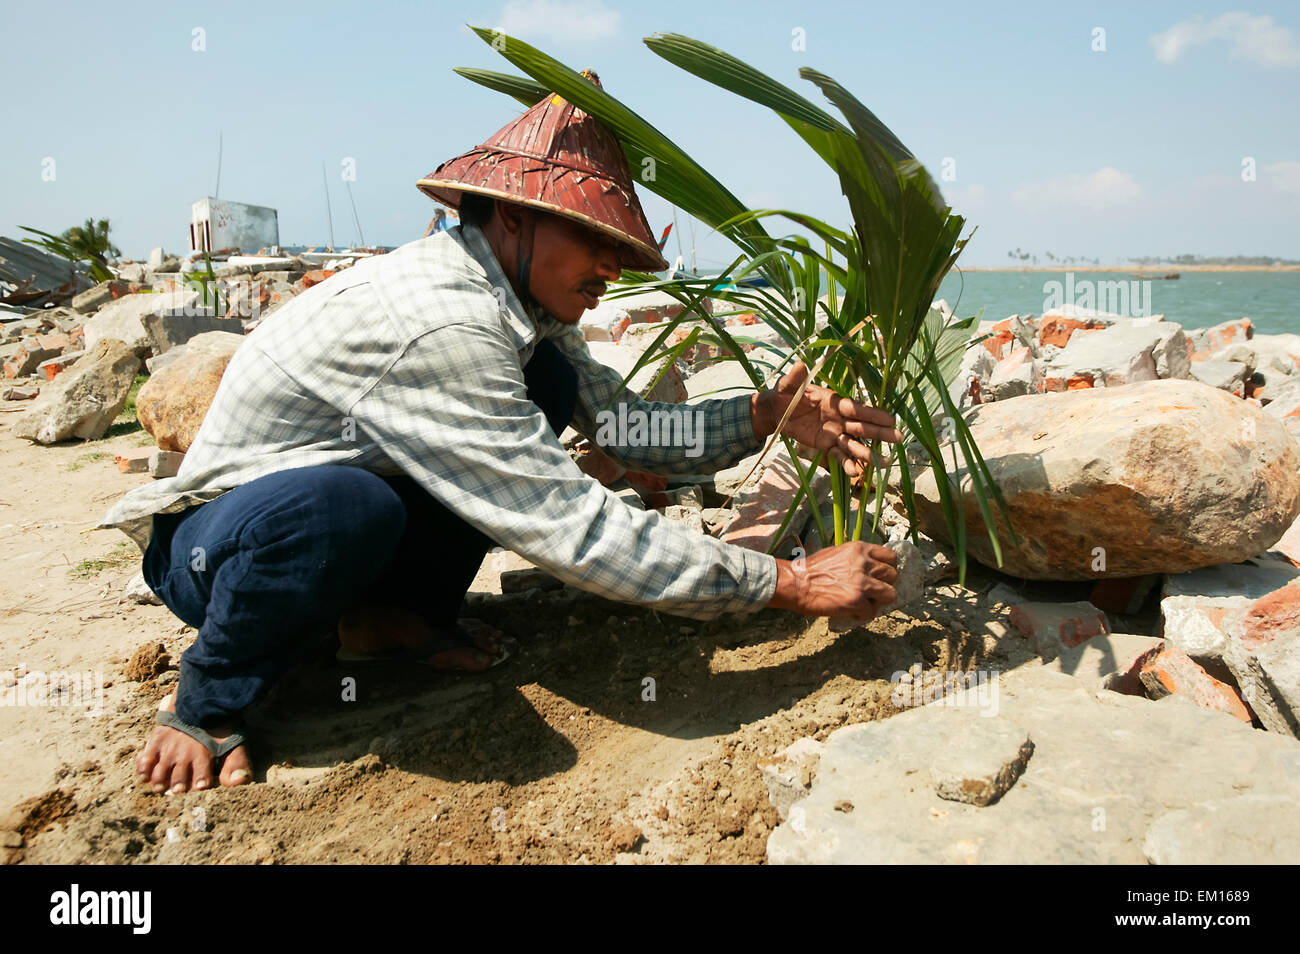 Indonesia,Planting,Aceh Province,Banda Aceh Stock Photo